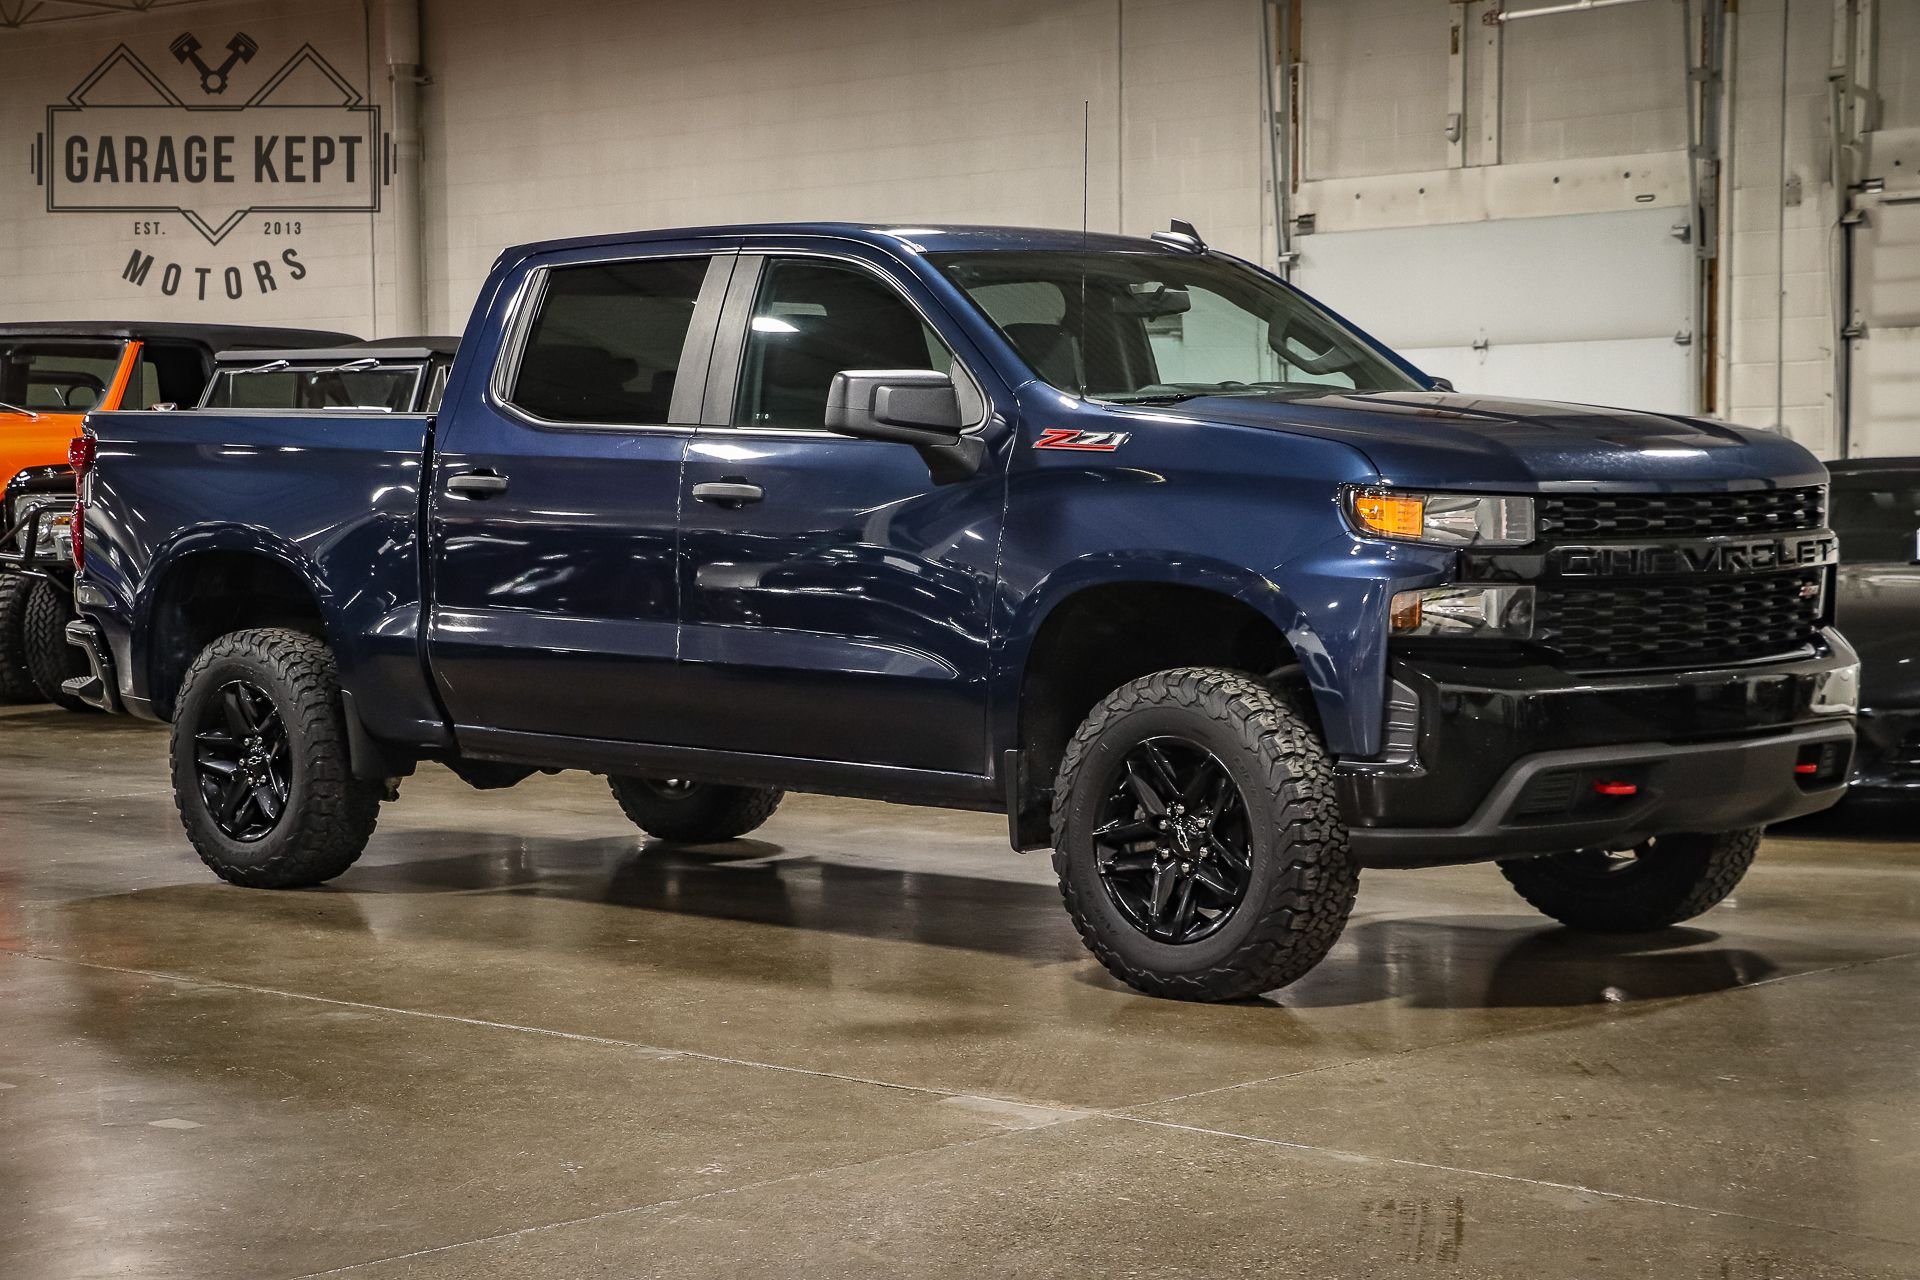 OneOwner 2019 Chevy Silverado 1500 Custom Is an Affordable HighMile